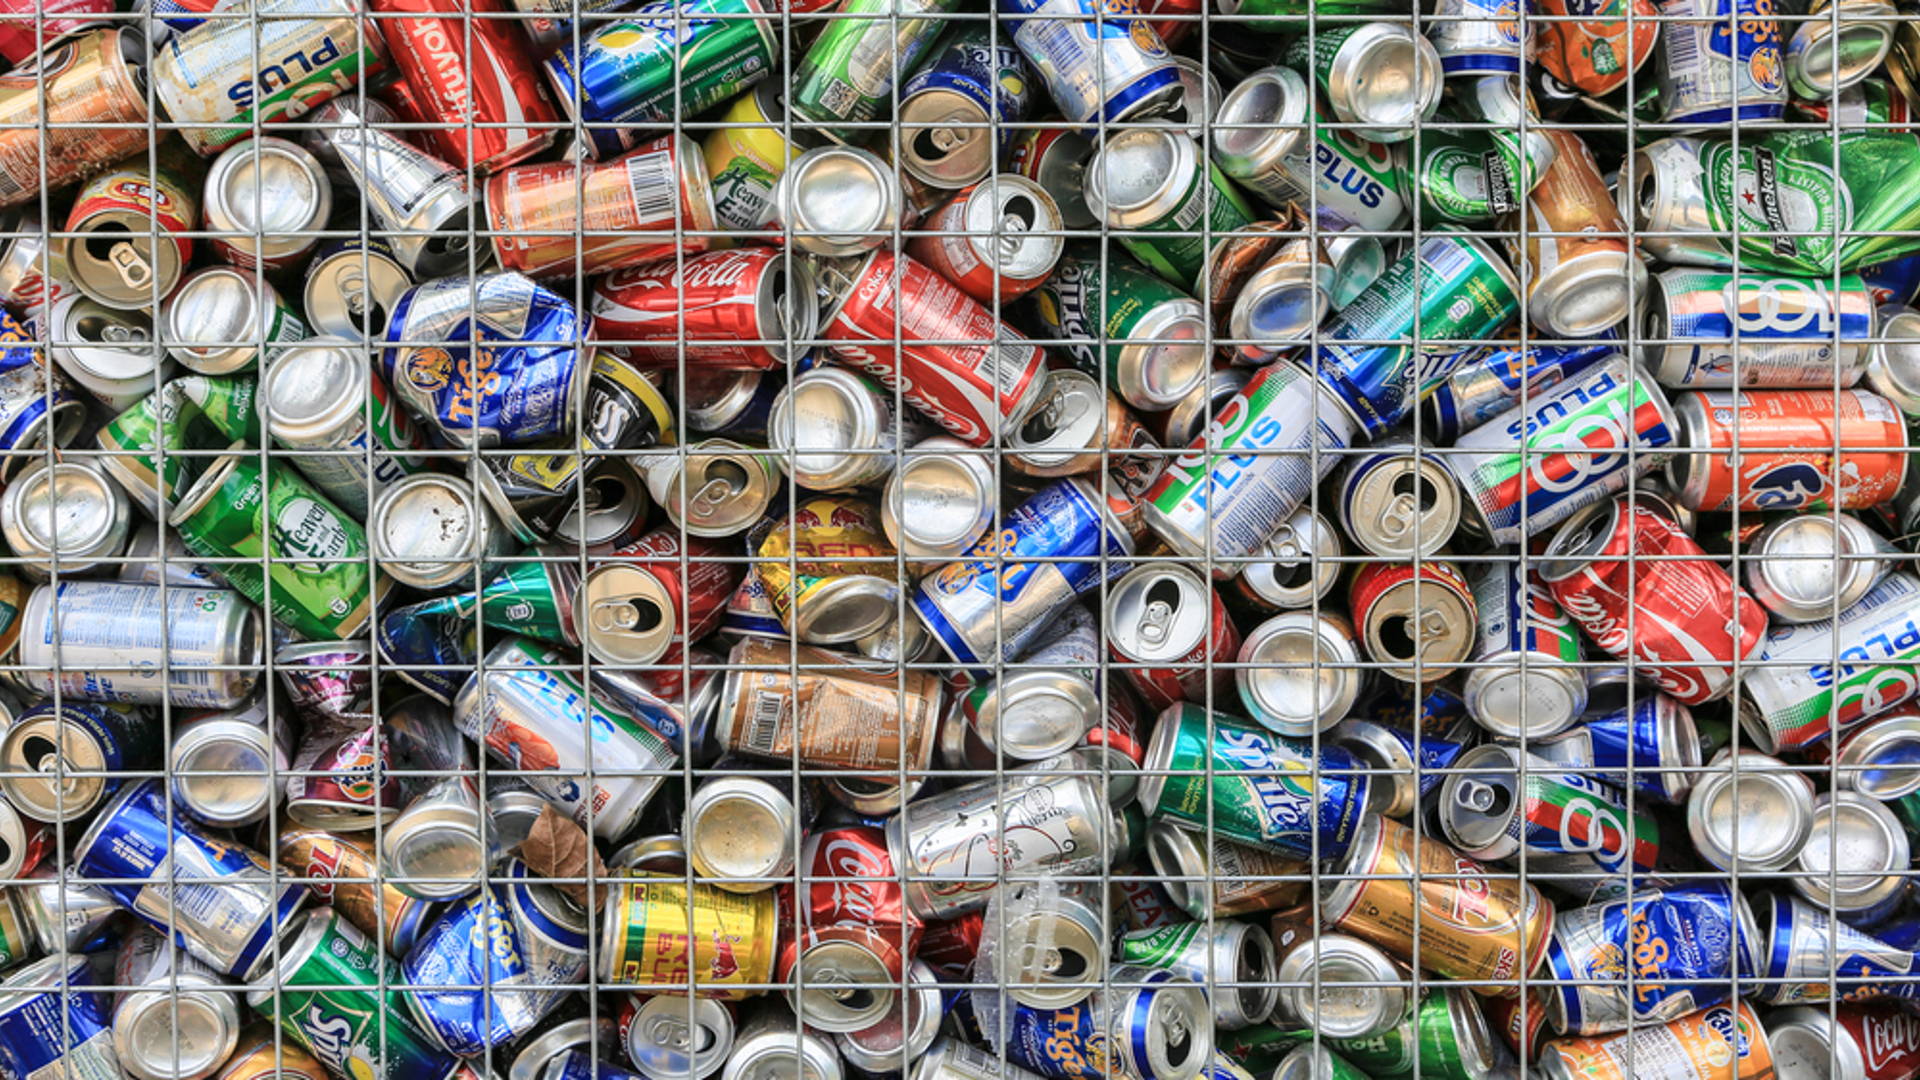 Featured image for Maine Becomes First US State To Enact Packaging EPR Law, Shifting Cost of Recycling To Companies